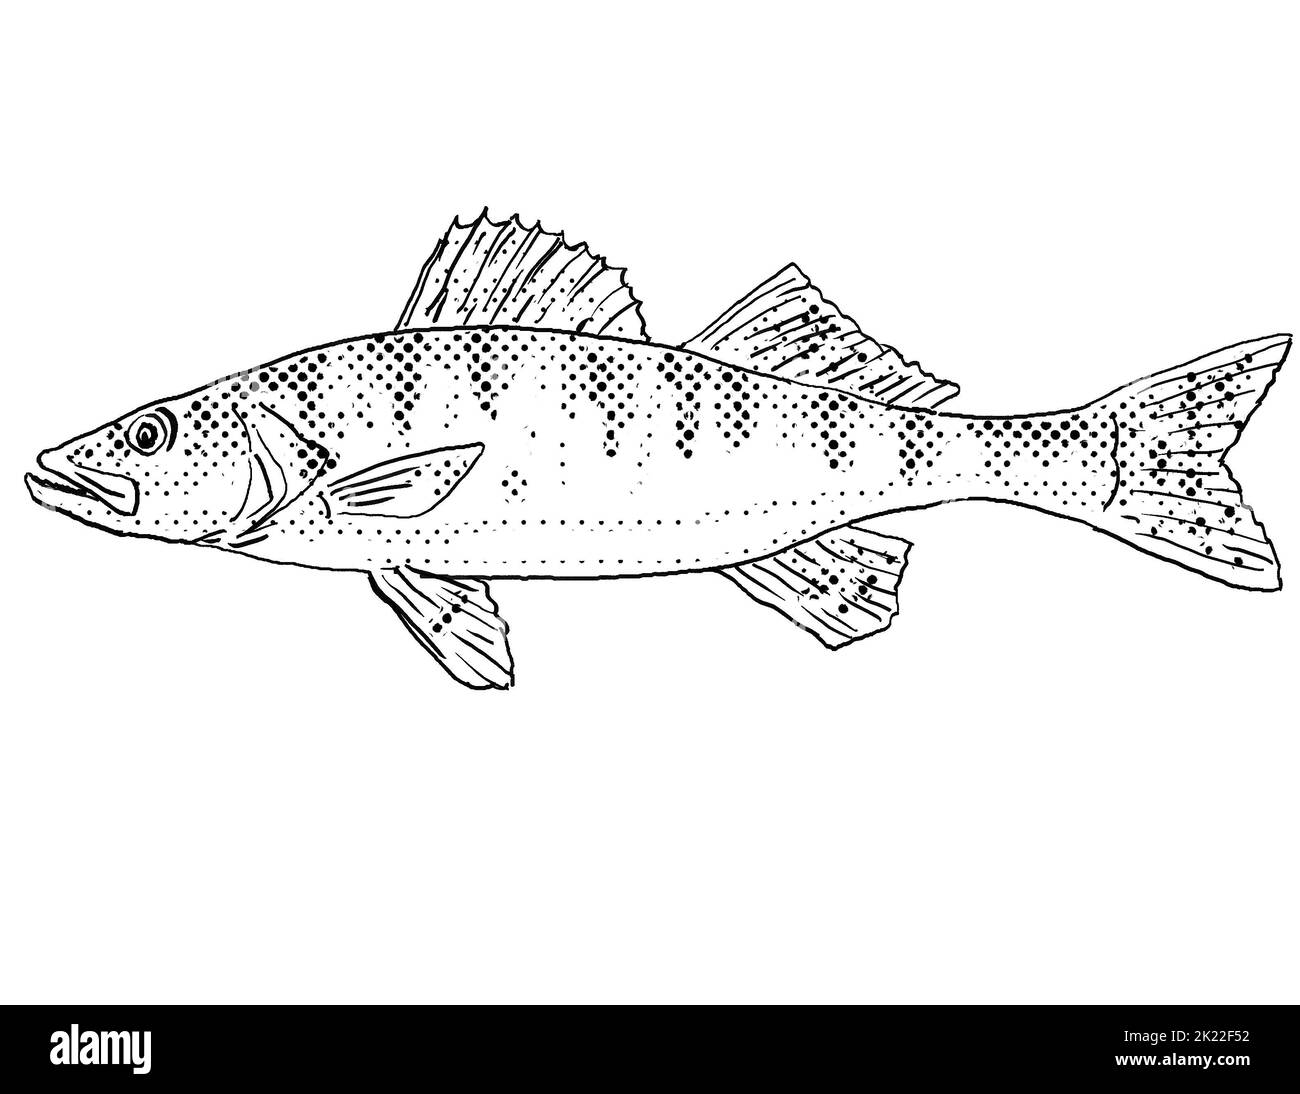 Cartoon style line drawing of a walleye or Sander vitreus, Stizostedion vitreum, yellow pike or yellow pickerel a freshwater fish endemic to North Ame Stock Photo